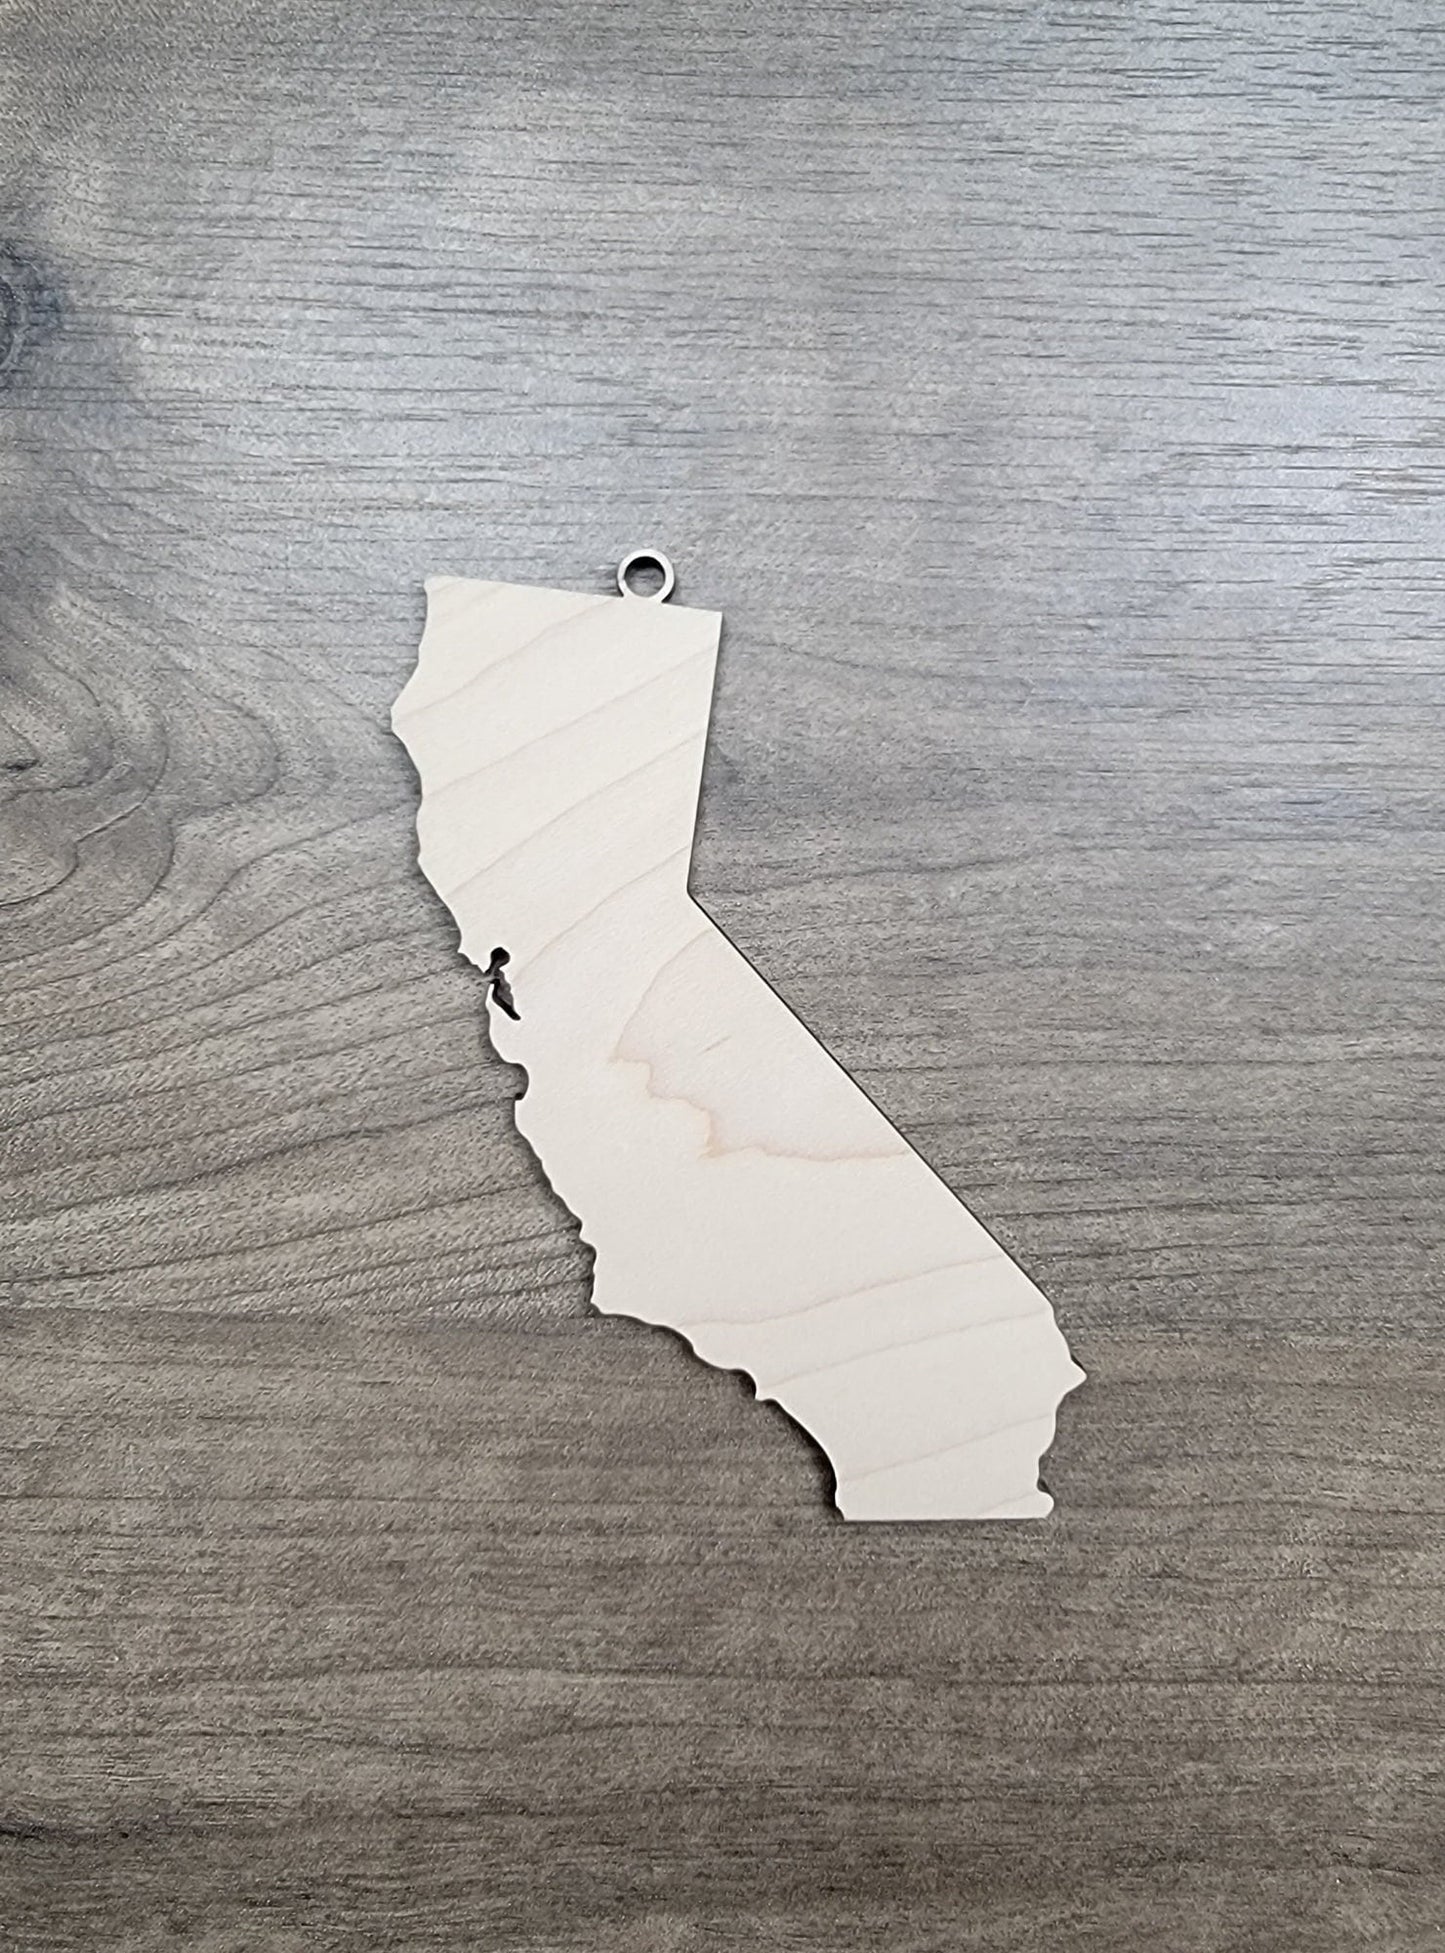 California Ornament, CA State Shape Bulk wood Blank, Unfinished, Wood Ornament, DIY, Christmas ornaments, Blanks for Crafts, sign making